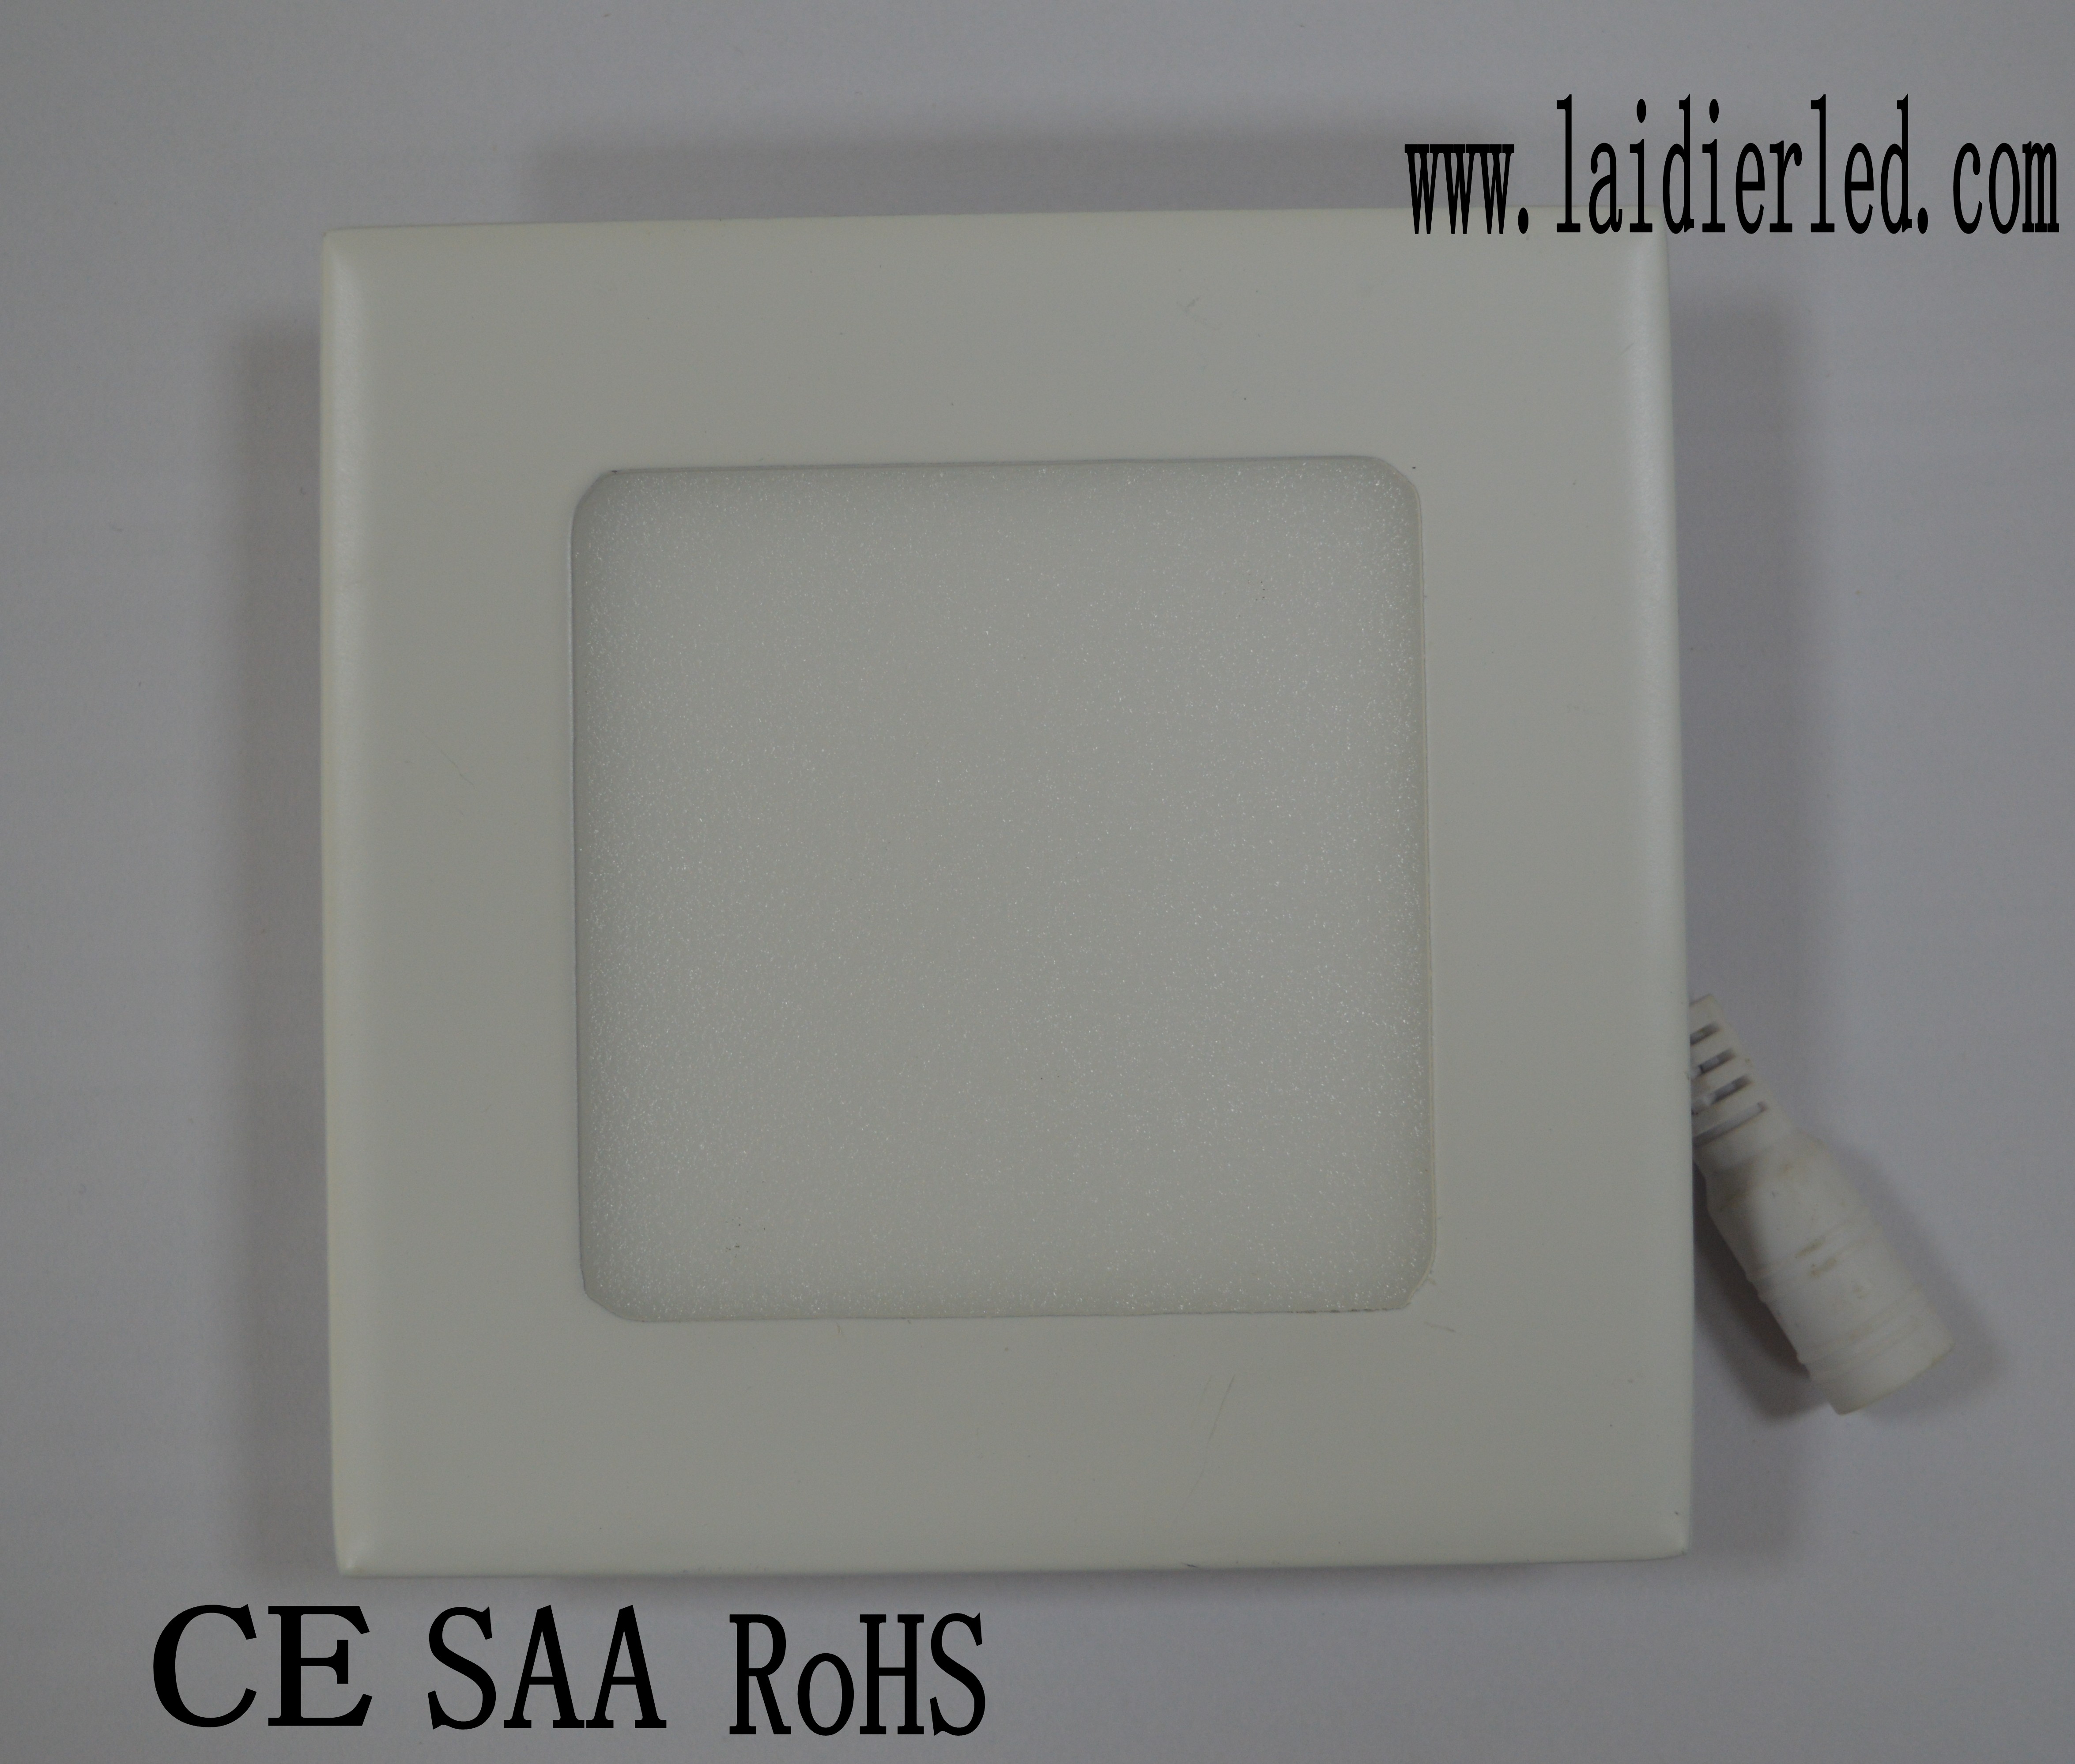 Hot sale high quality LED Panel Light square 9W, LED SMD2835, 2years warranty